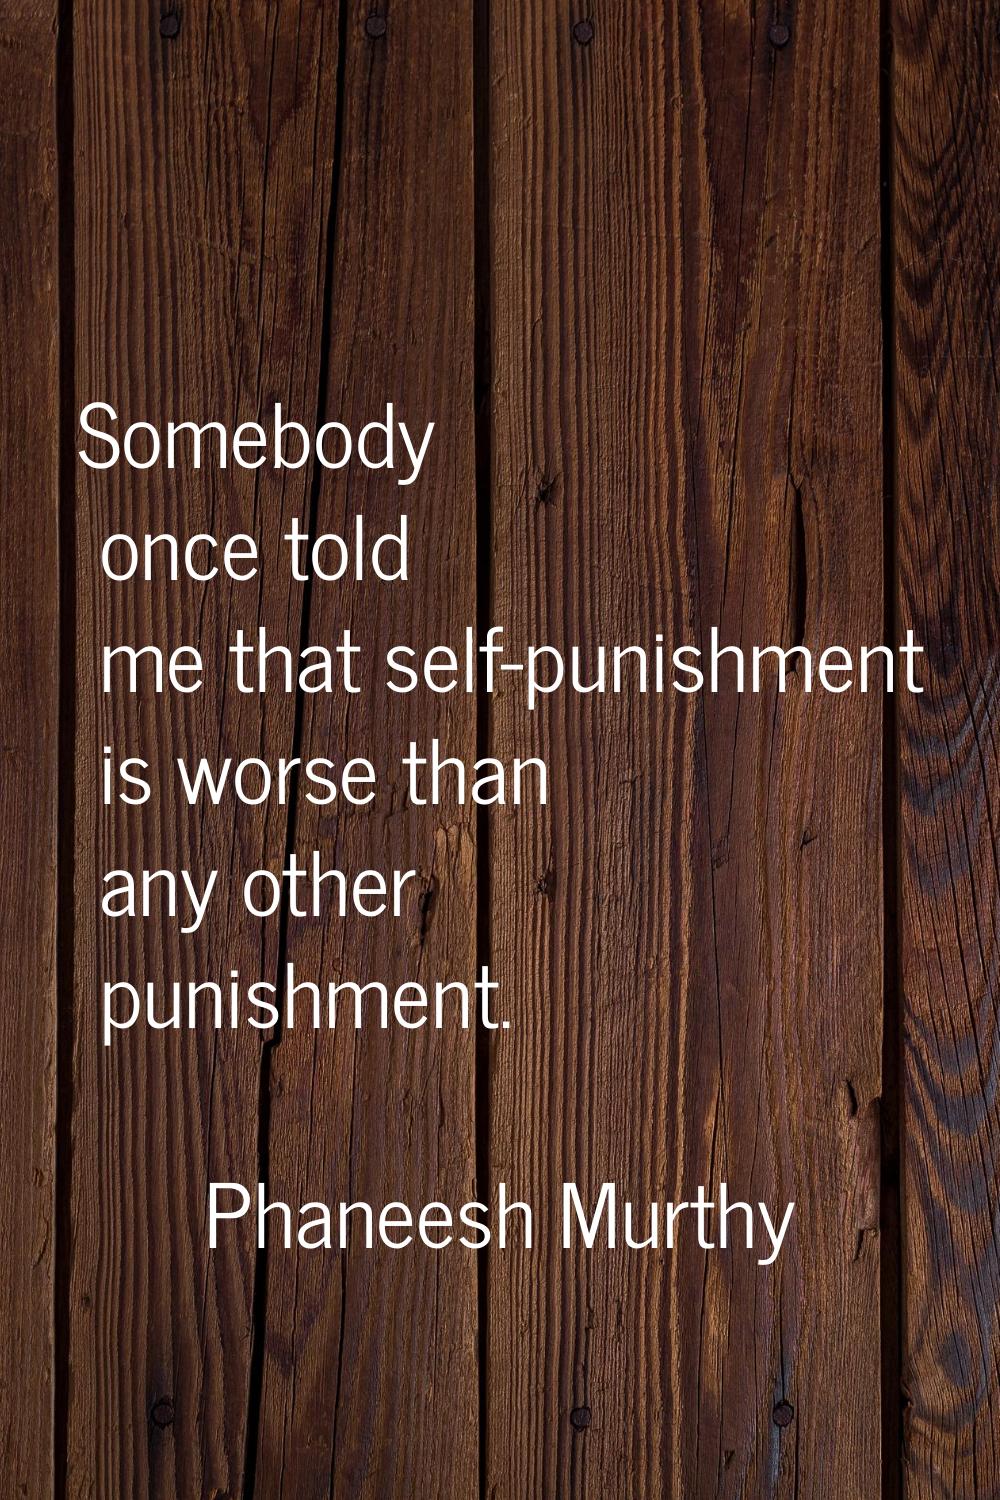 Somebody once told me that self-punishment is worse than any other punishment.